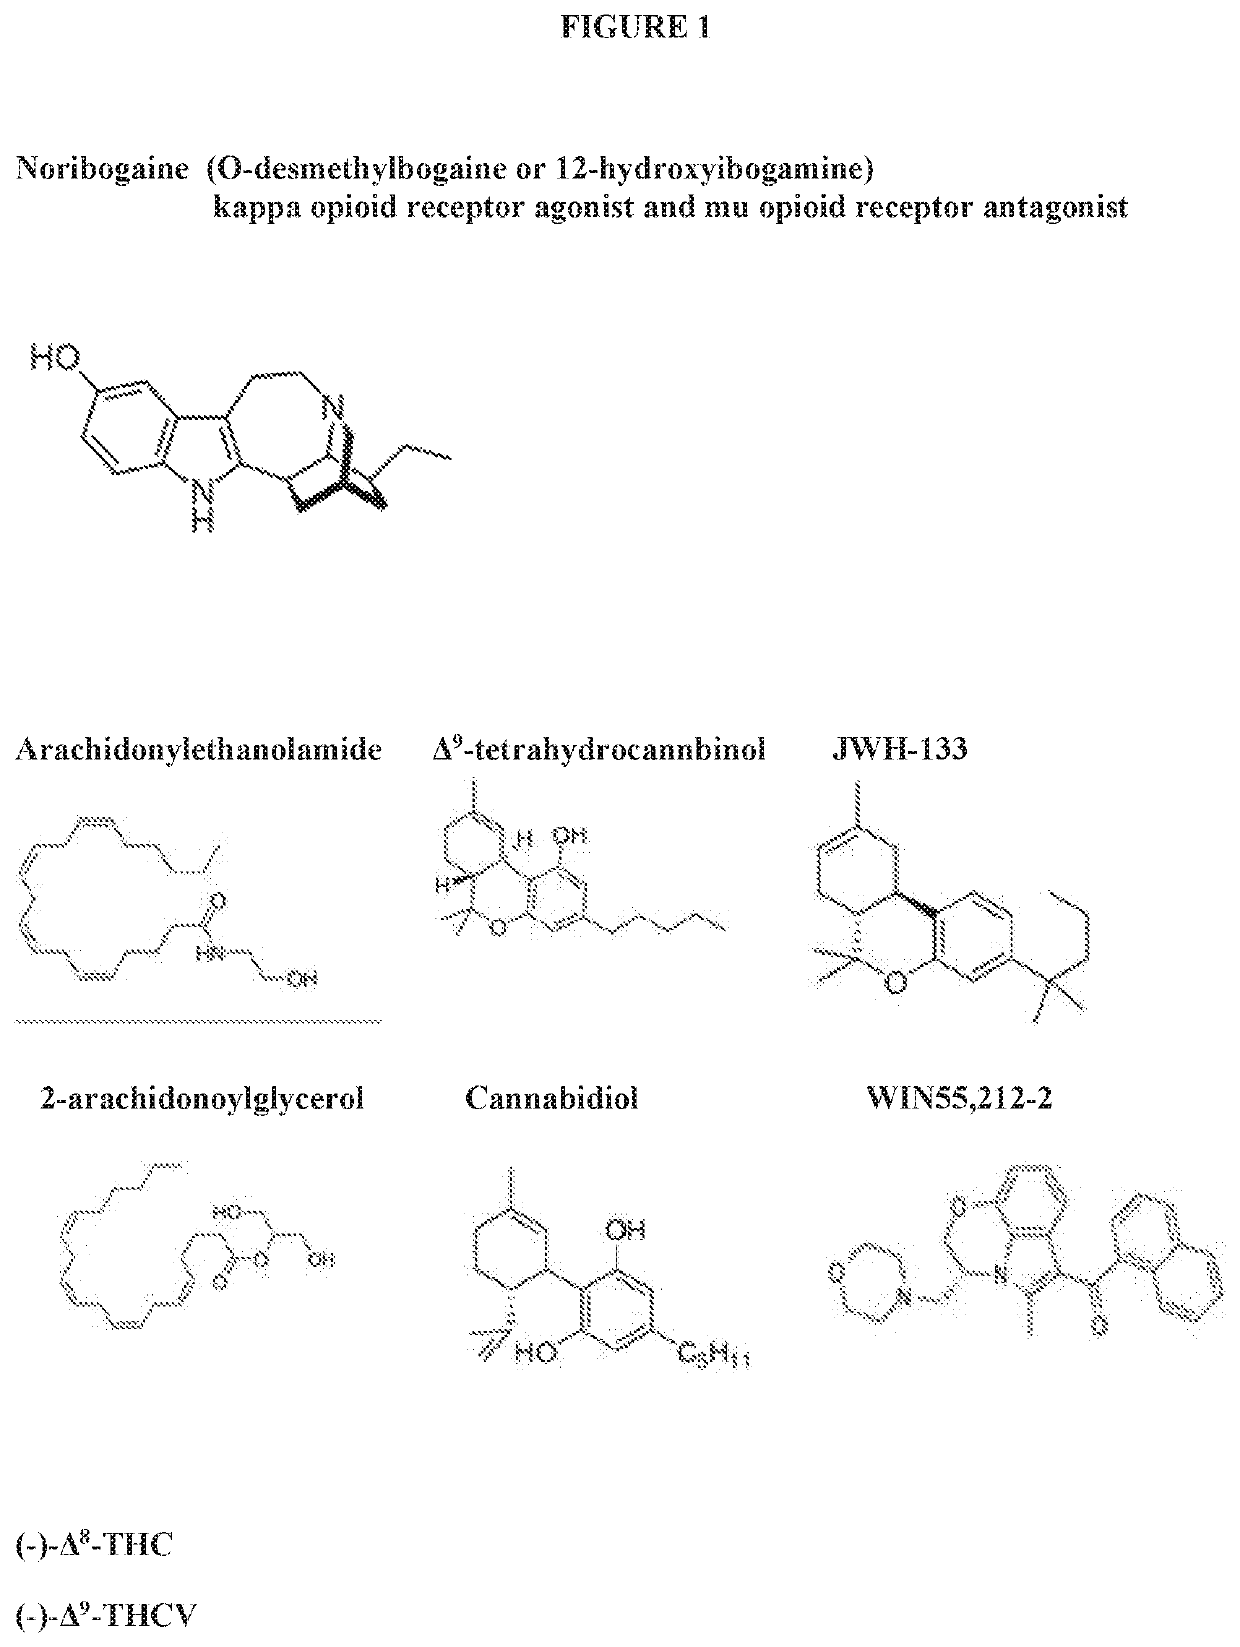 Methods for the non-toxic treatment for opioid drug withdrawal combining noribogaine and cannabinoids